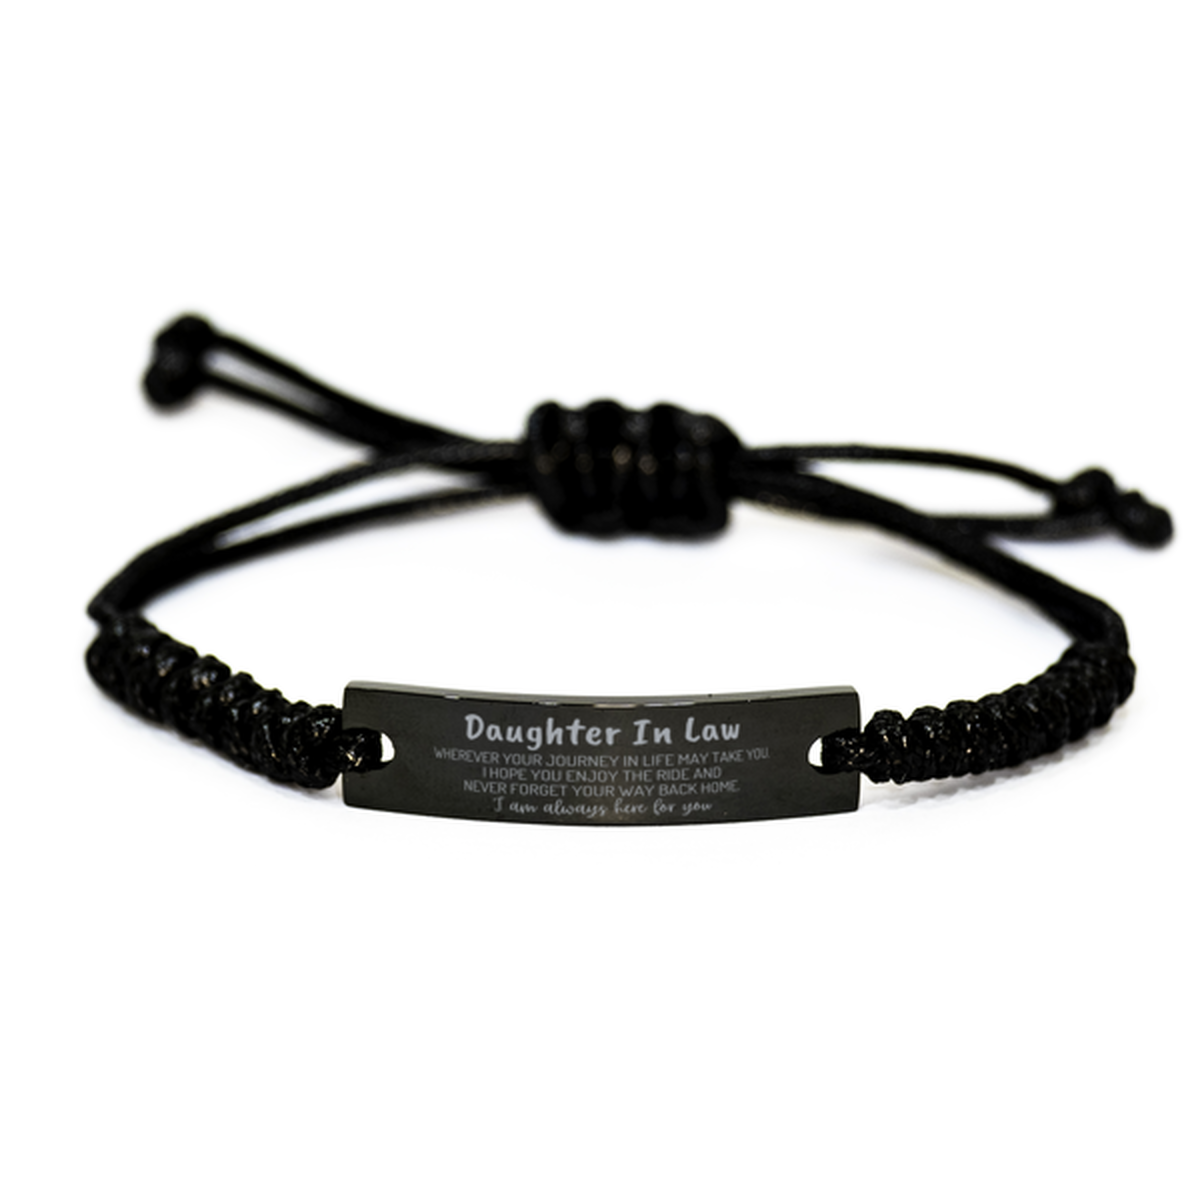 Daughter In Law wherever your journey in life may take you, I am always here for you Daughter In Law Black Rope Bracelet, Awesome Christmas Gifts For Daughter In Law, Daughter In Law Birthday Gifts for Men Women Family Loved One